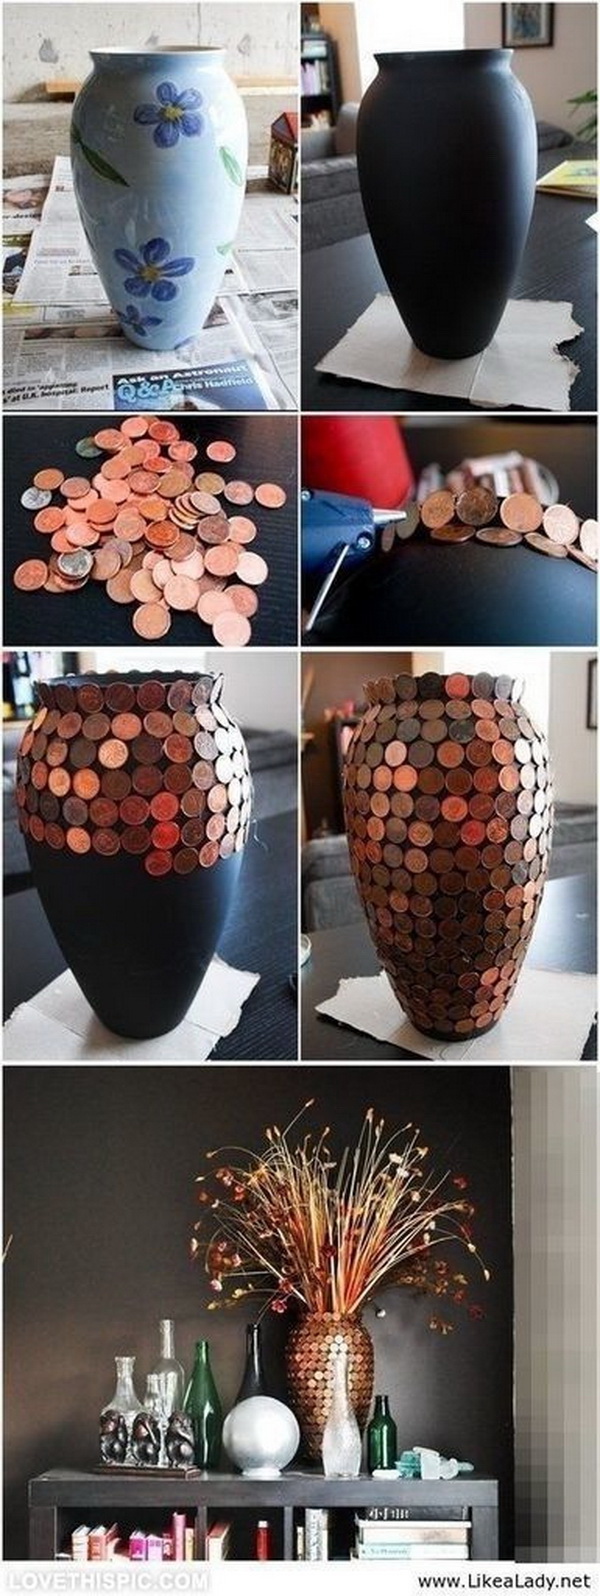 DIY Pennies Vase. Give the old vase an interesting look with the shining pennies. 